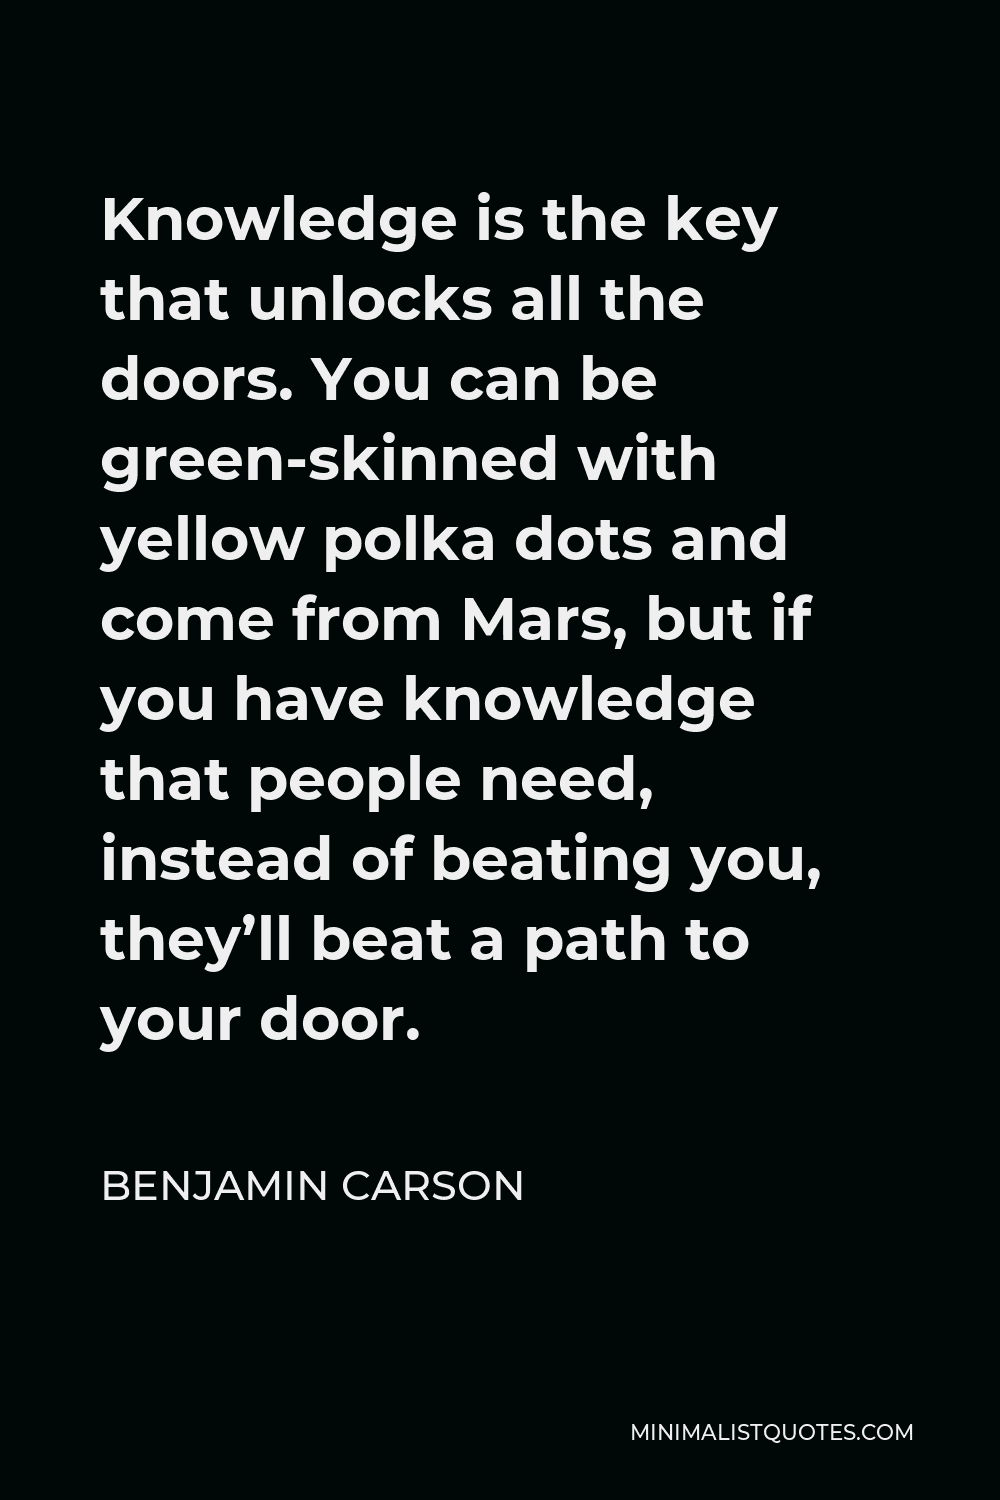 Benjamin Carson Quote - Knowledge is the key that unlocks all the doors. You can be green-skinned with yellow polka dots and come from Mars, but if you have knowledge that people need, instead of beating you, they’ll beat a path to your door.